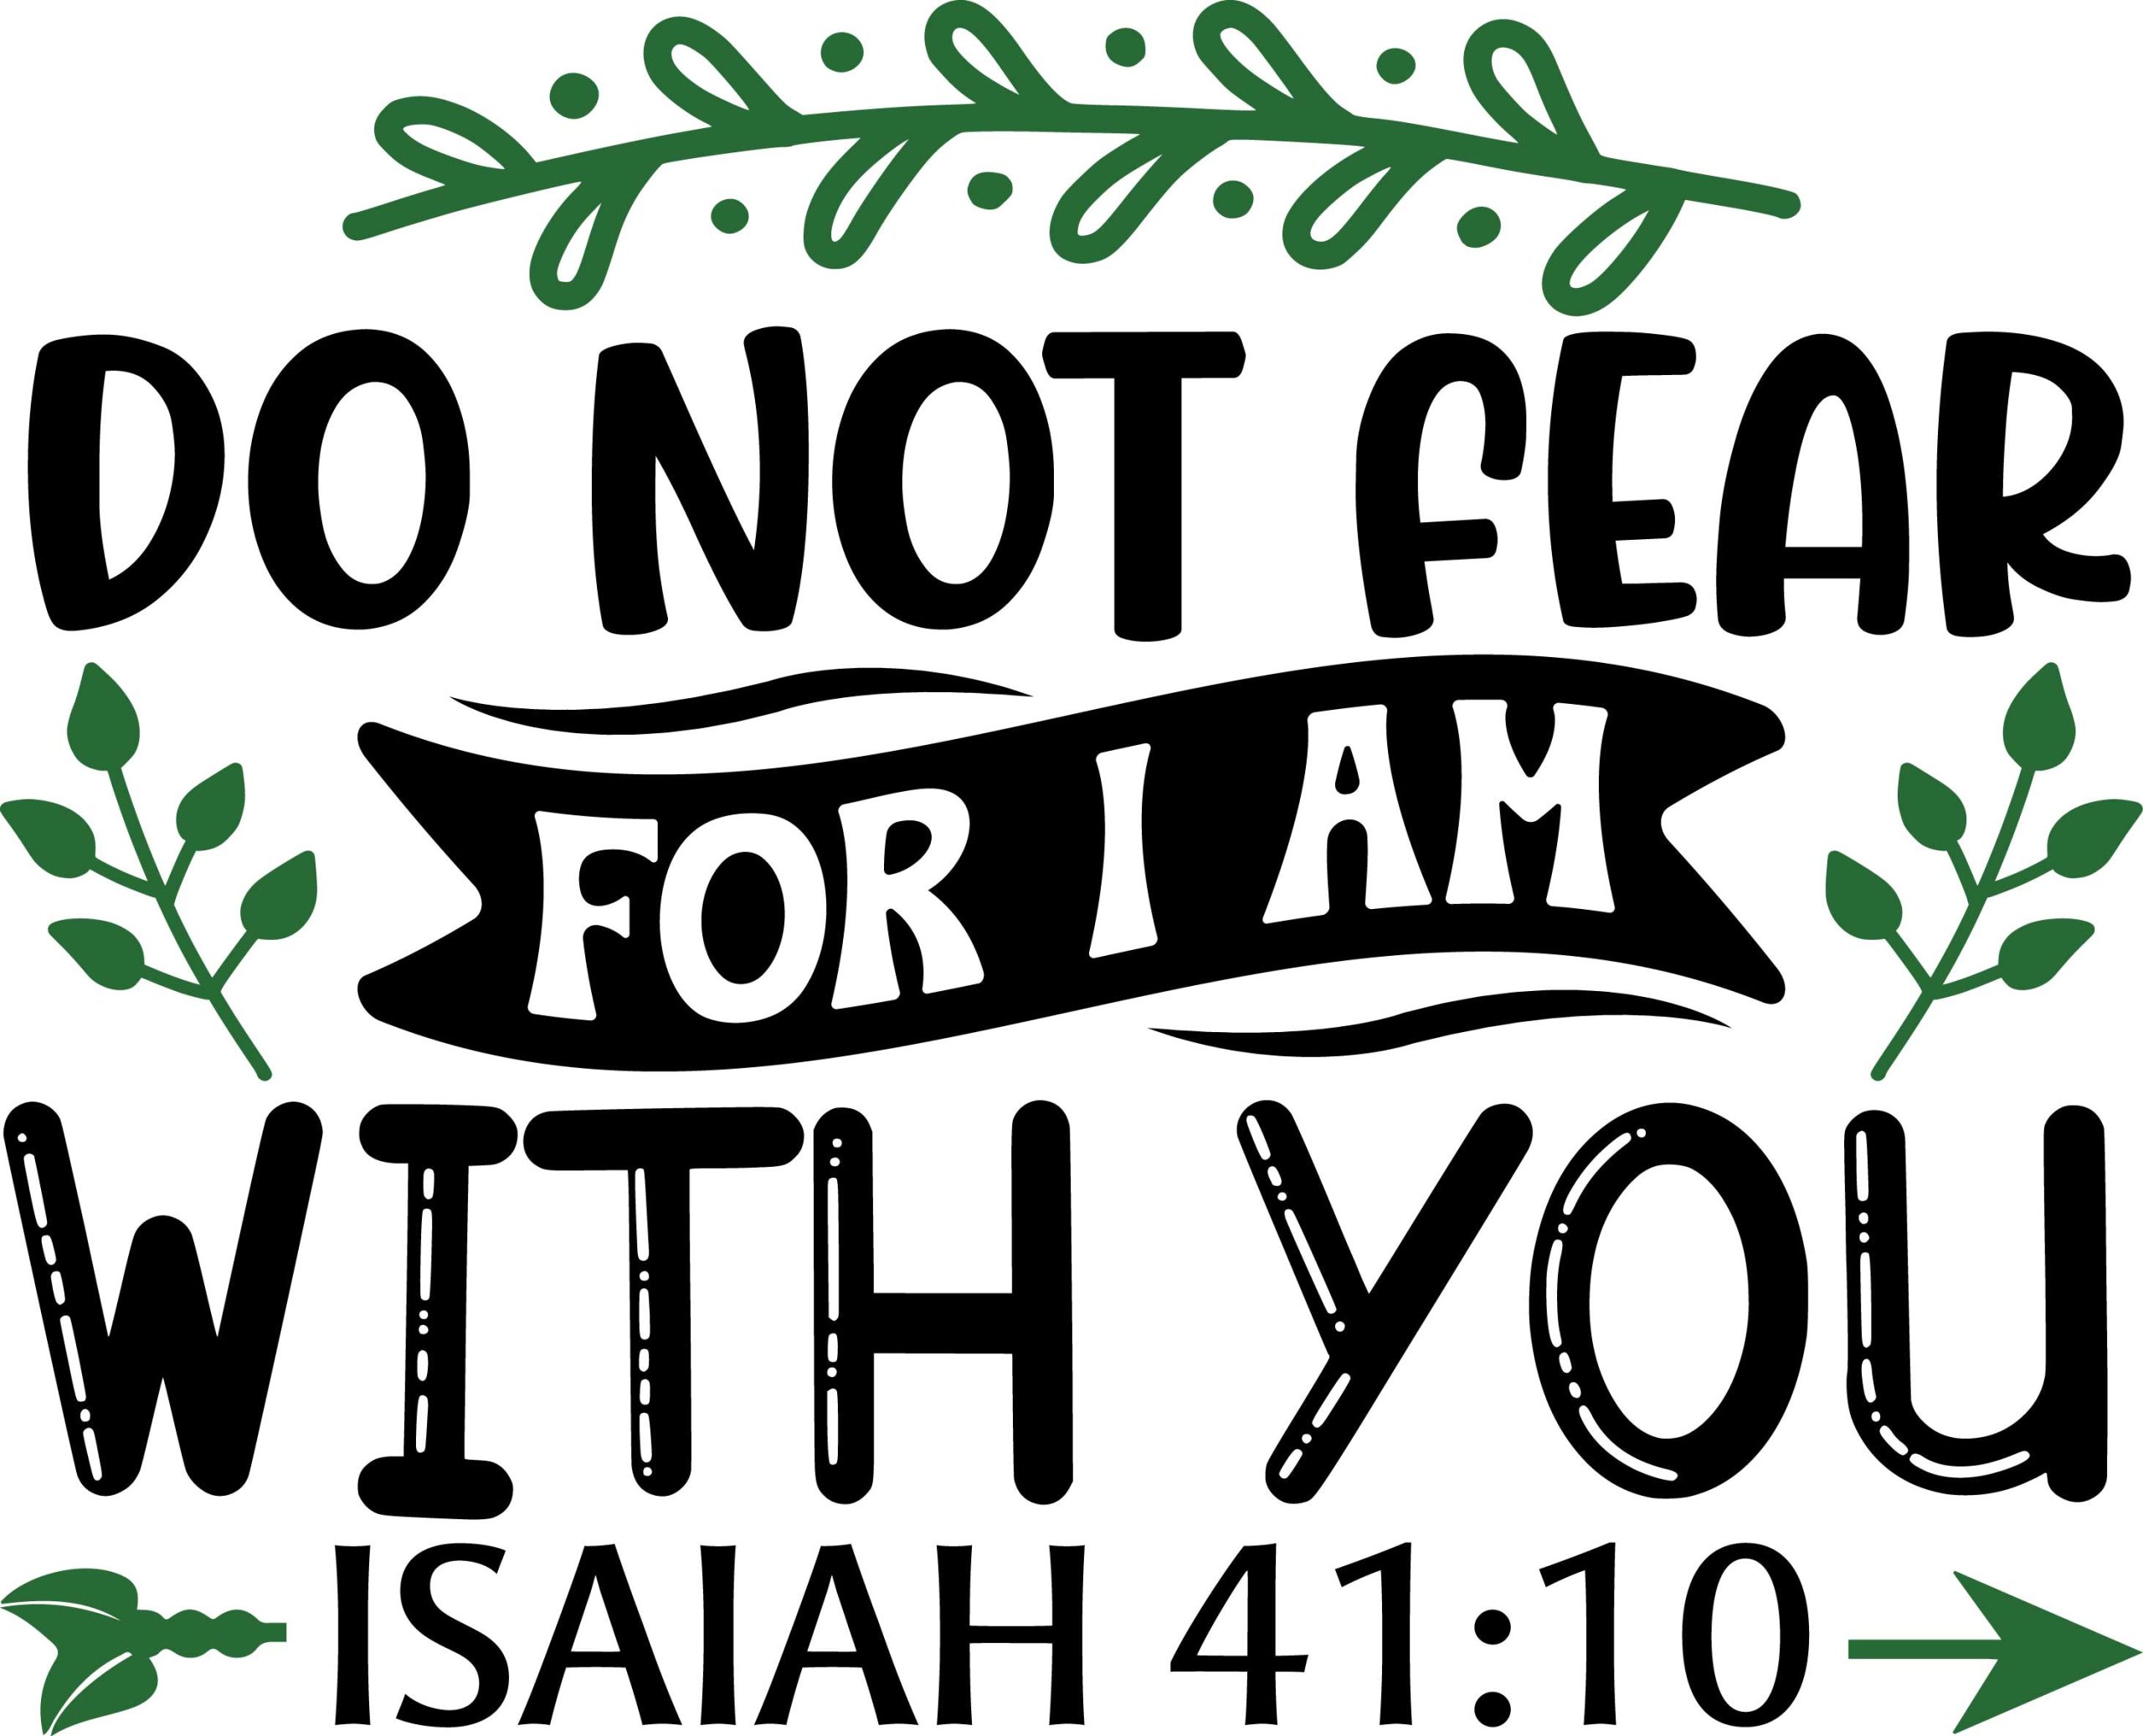 Do not fear for i am with you Isaiah 41:10, bible verses, scripture verses, svg files, passages, sayings, cricut designs, silhouette, embroidery, bundle, free cut files, design space, vector